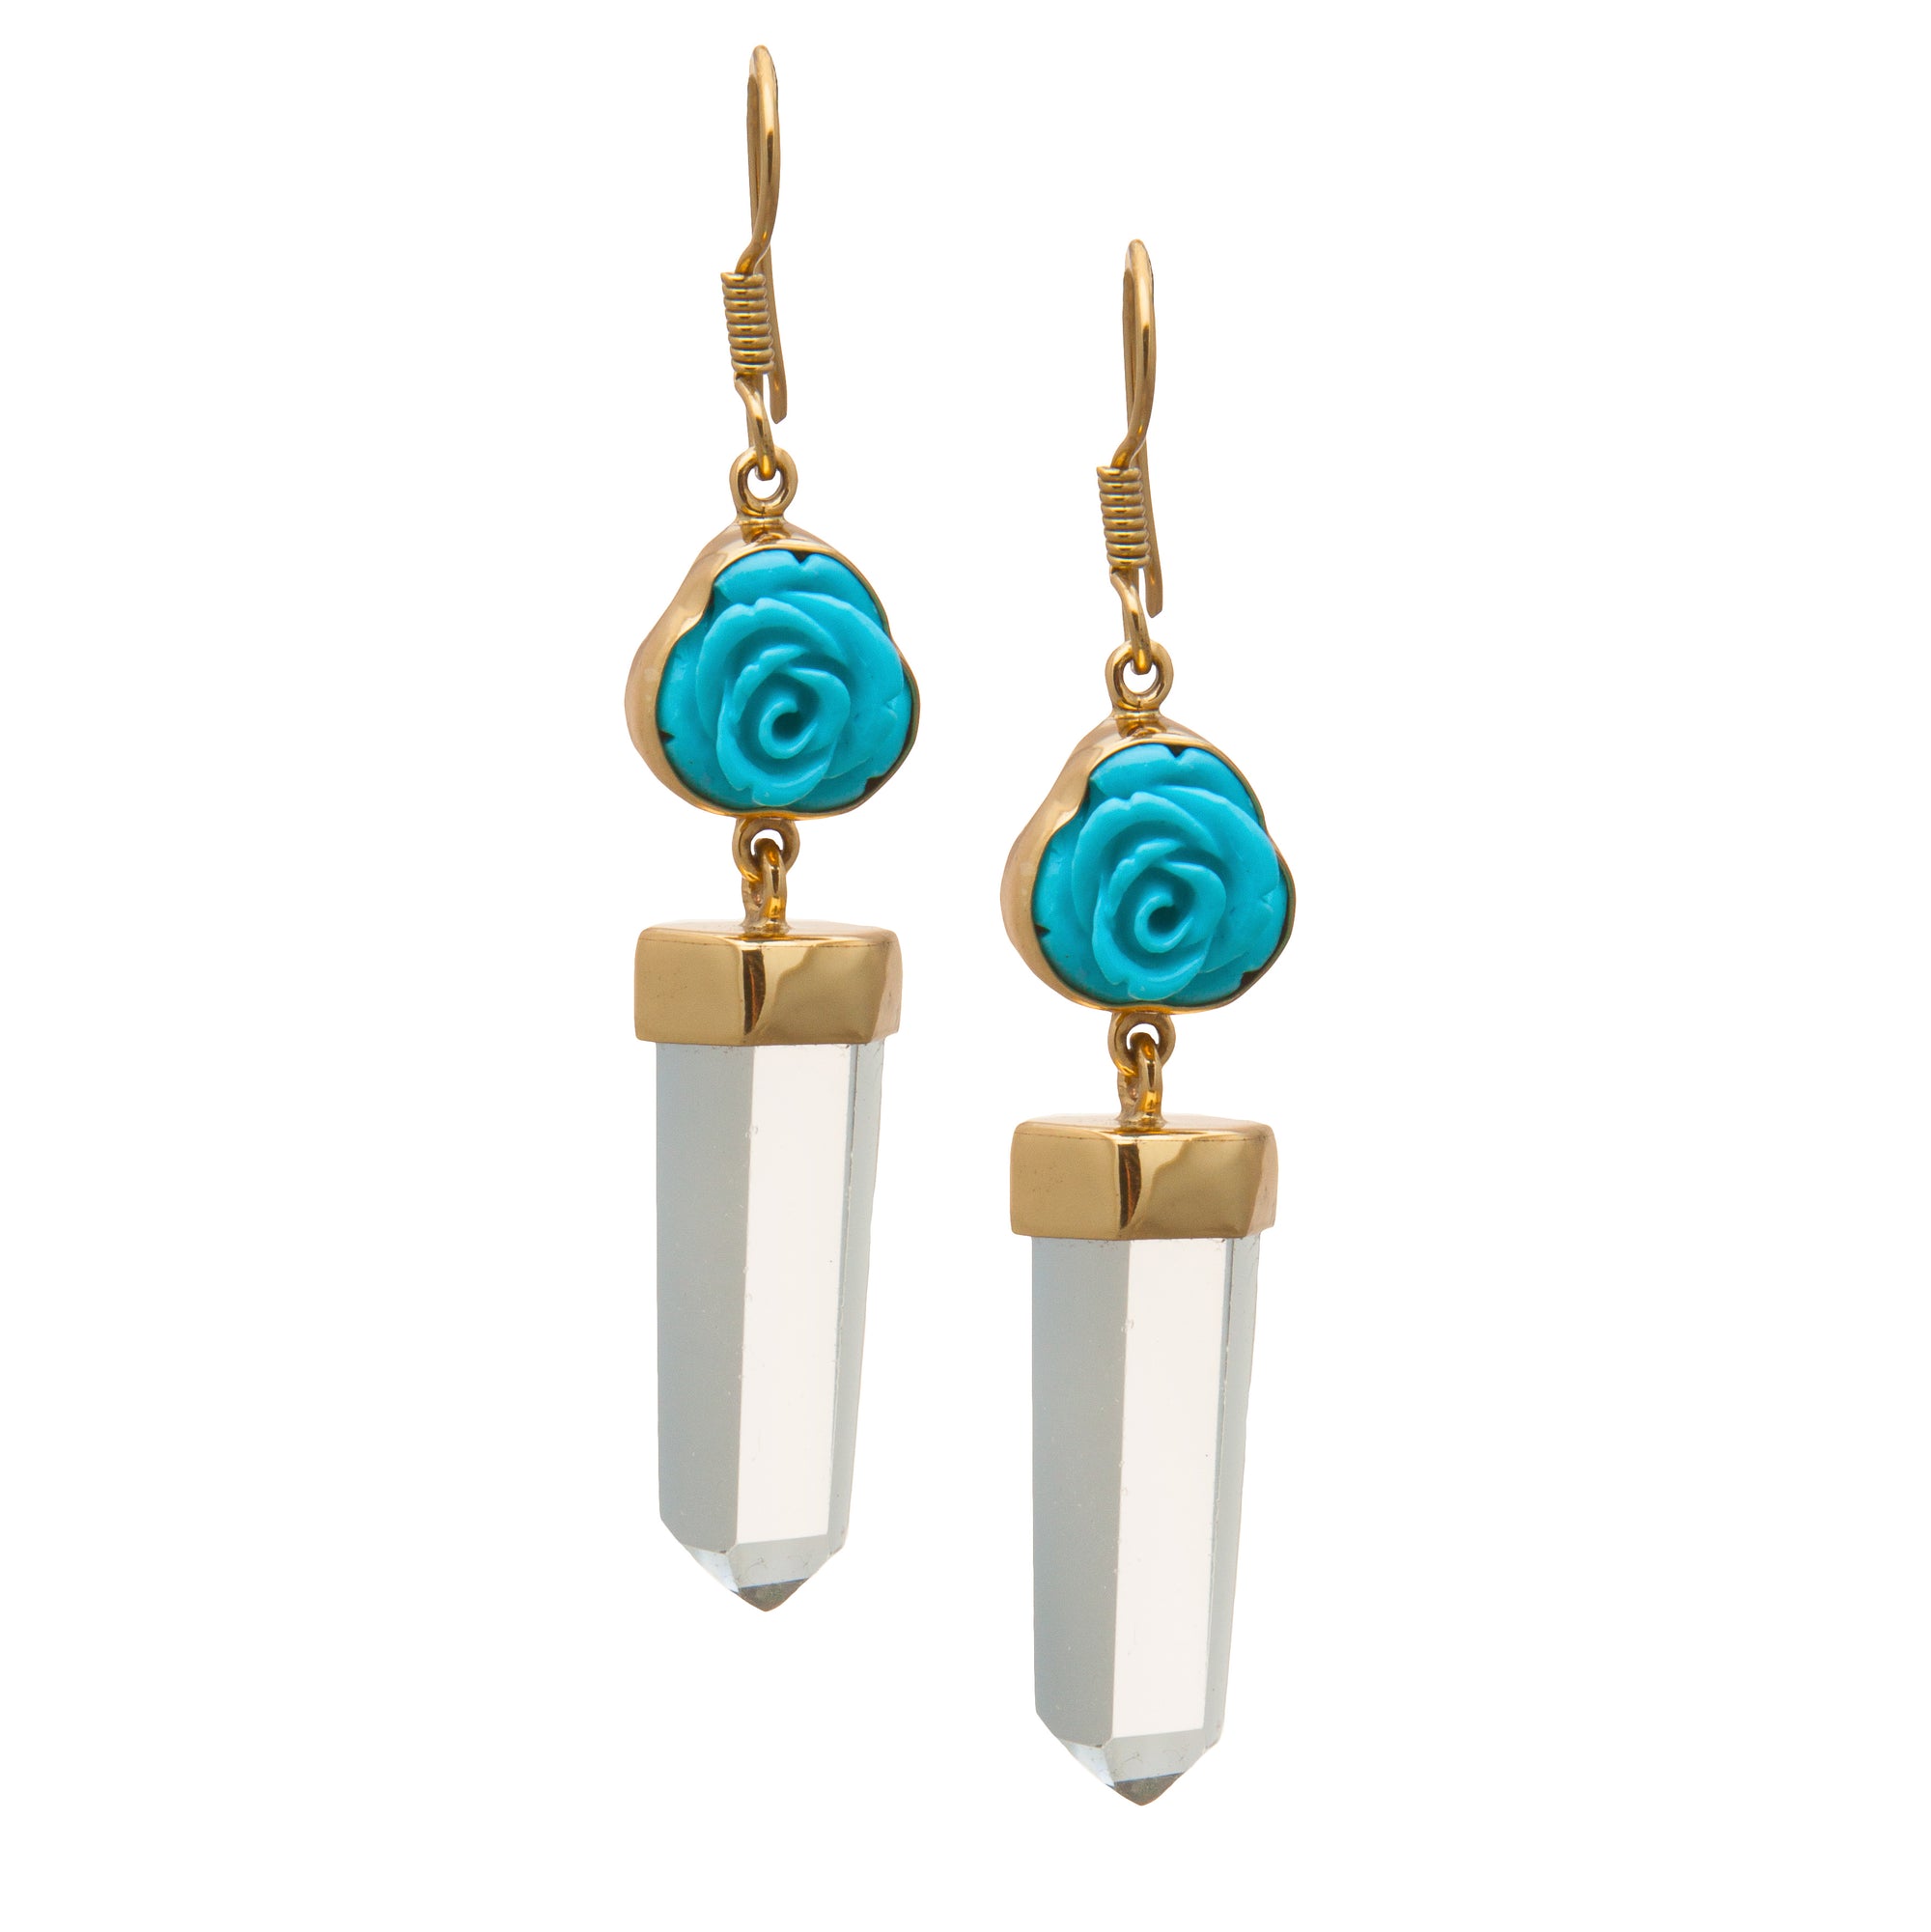 Alchemia Blue Rose and Clear Quartz Point Drop Earrings | Charles Albert Jewelry